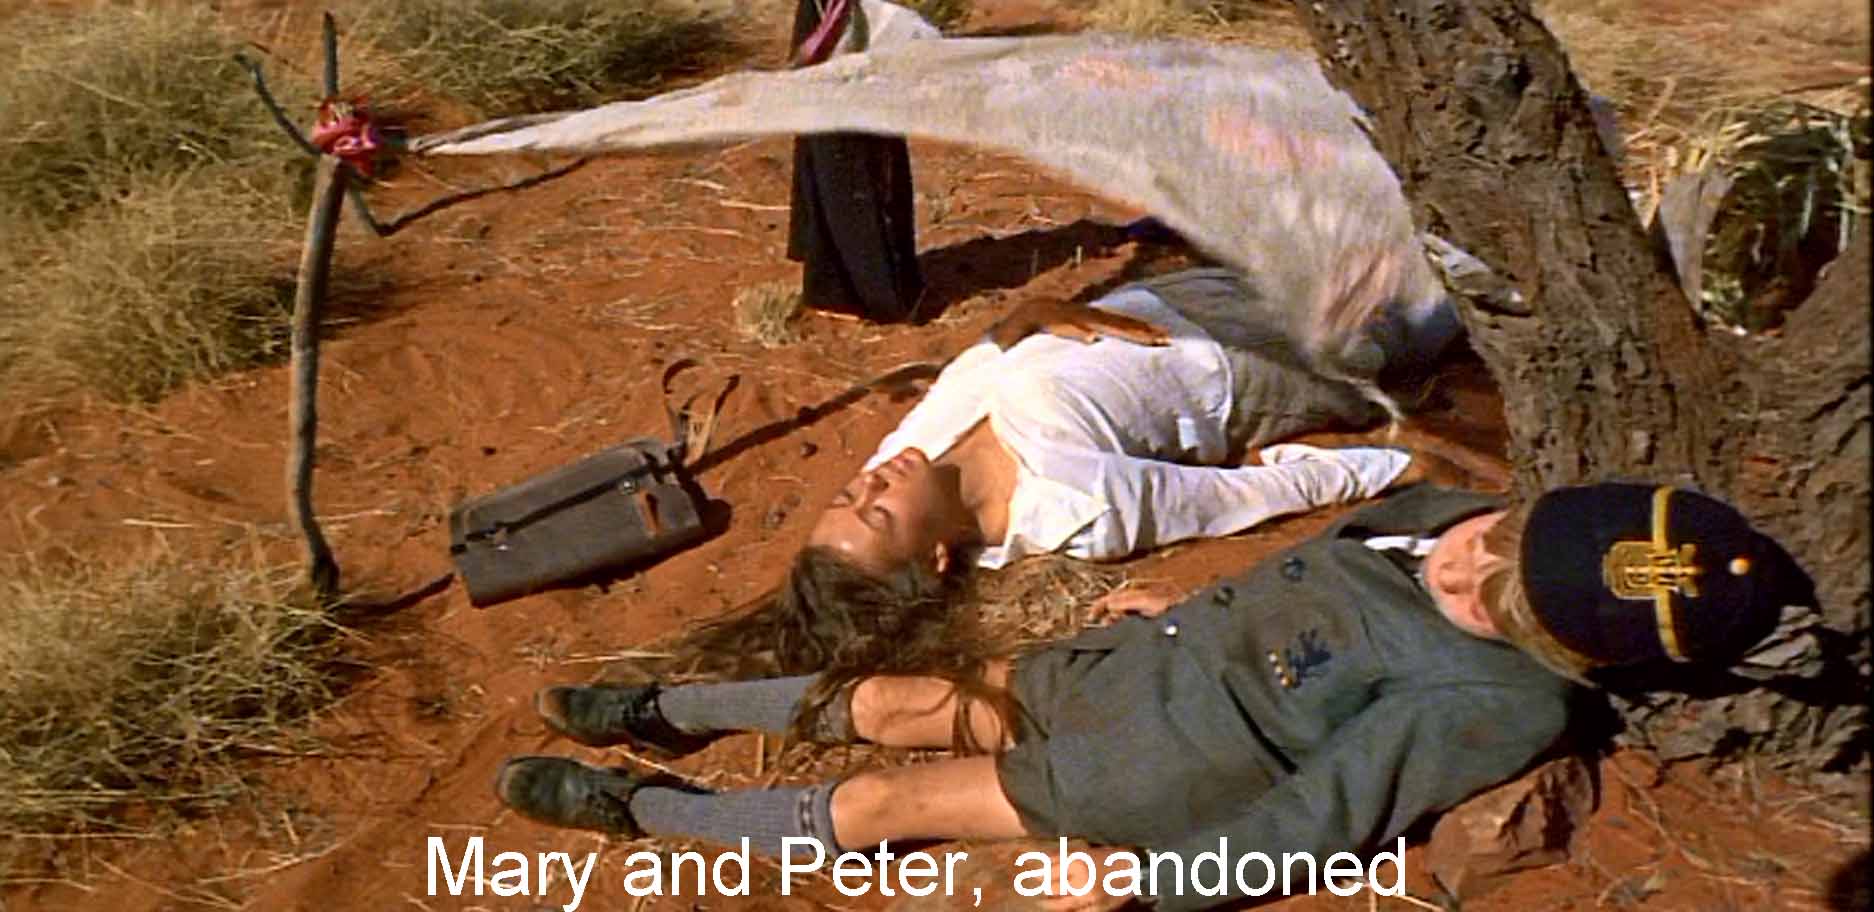 Mary and Peter abandoned